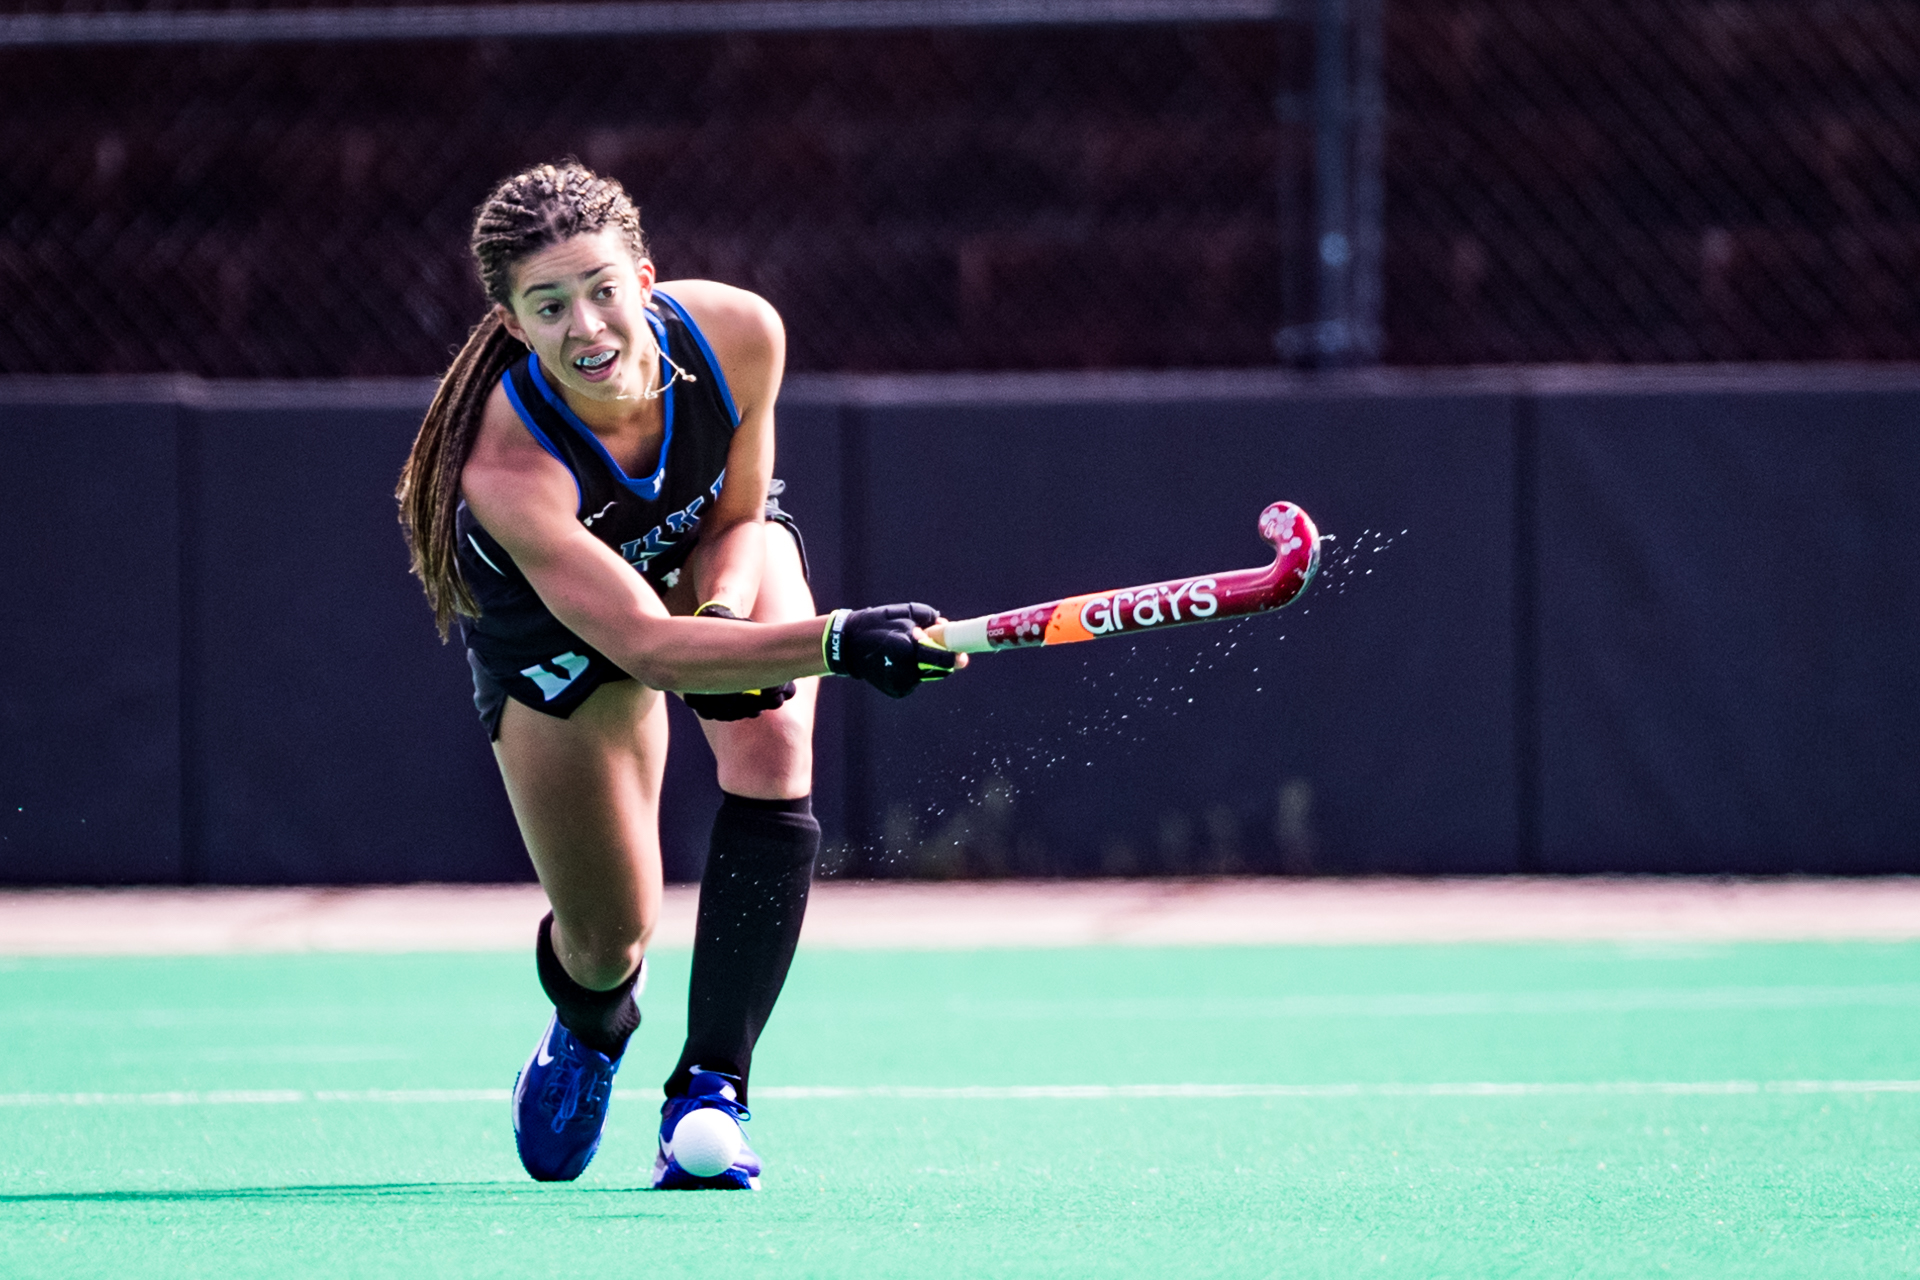 Darcy Bourne hits the ball playing for Duke University